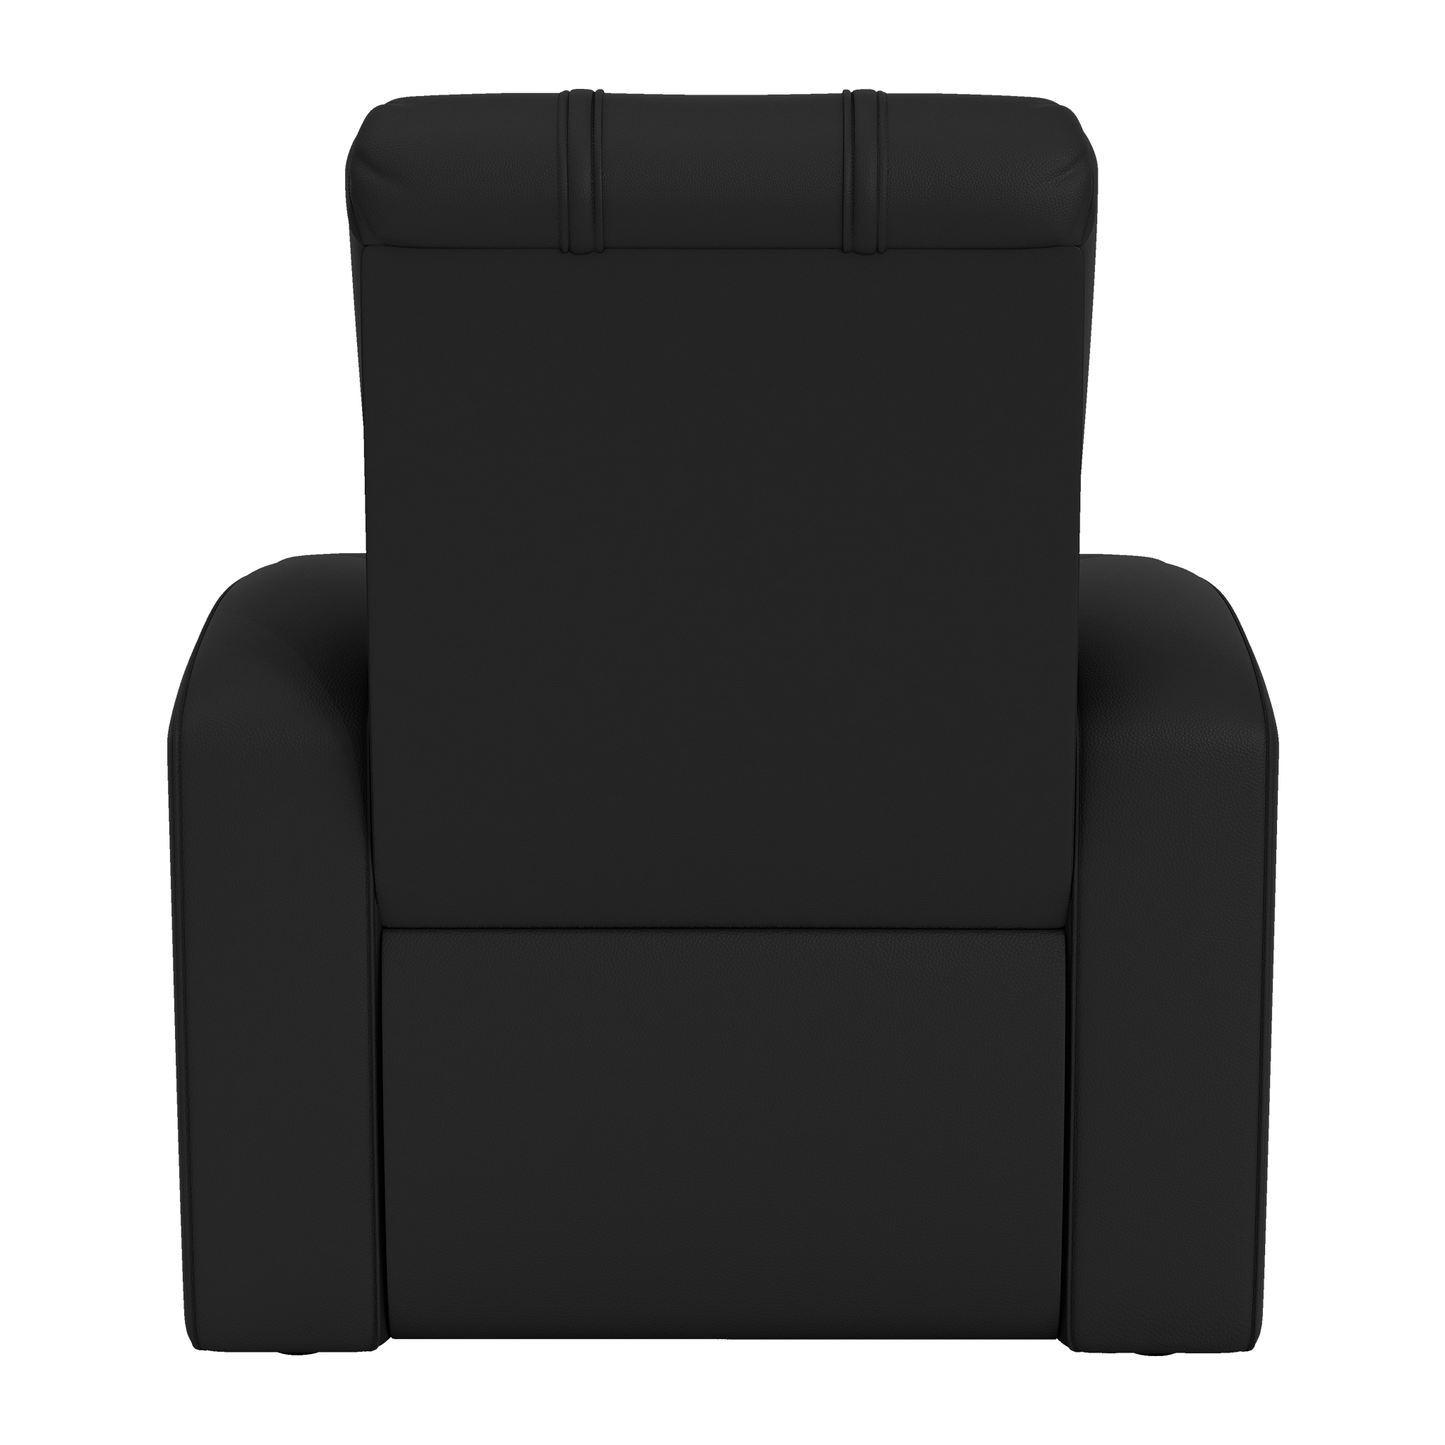 Relax Home Theater Recliner with Arizona Cardinals Classic Logo